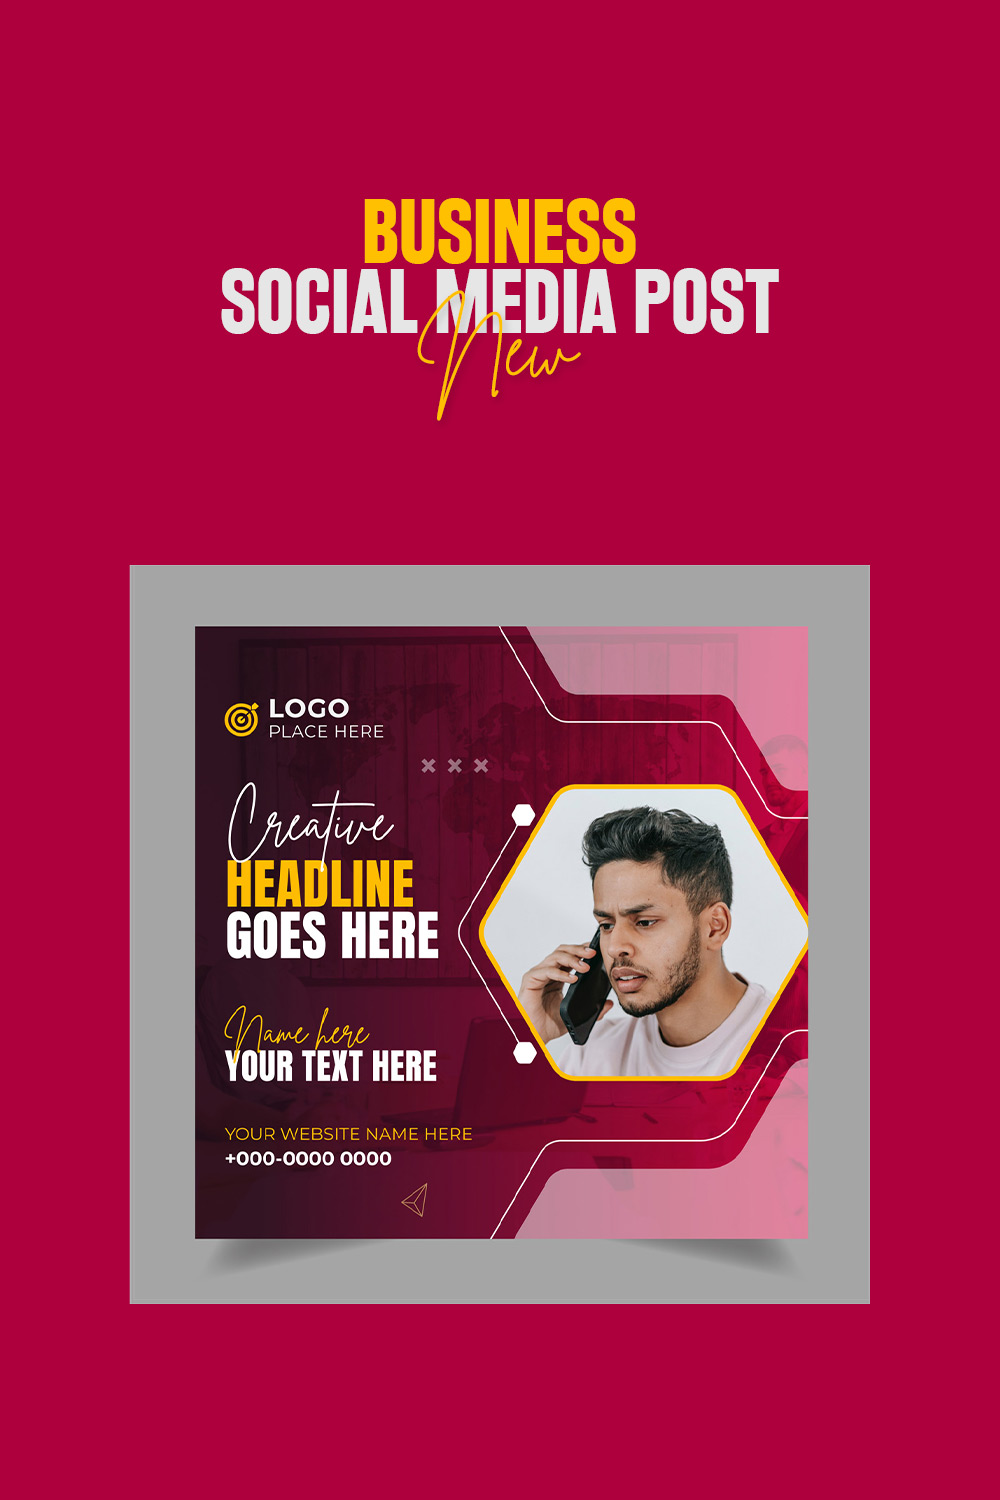 Digital marketing agency webinar or corporate social media post template vector only-$4 pinterest preview image.